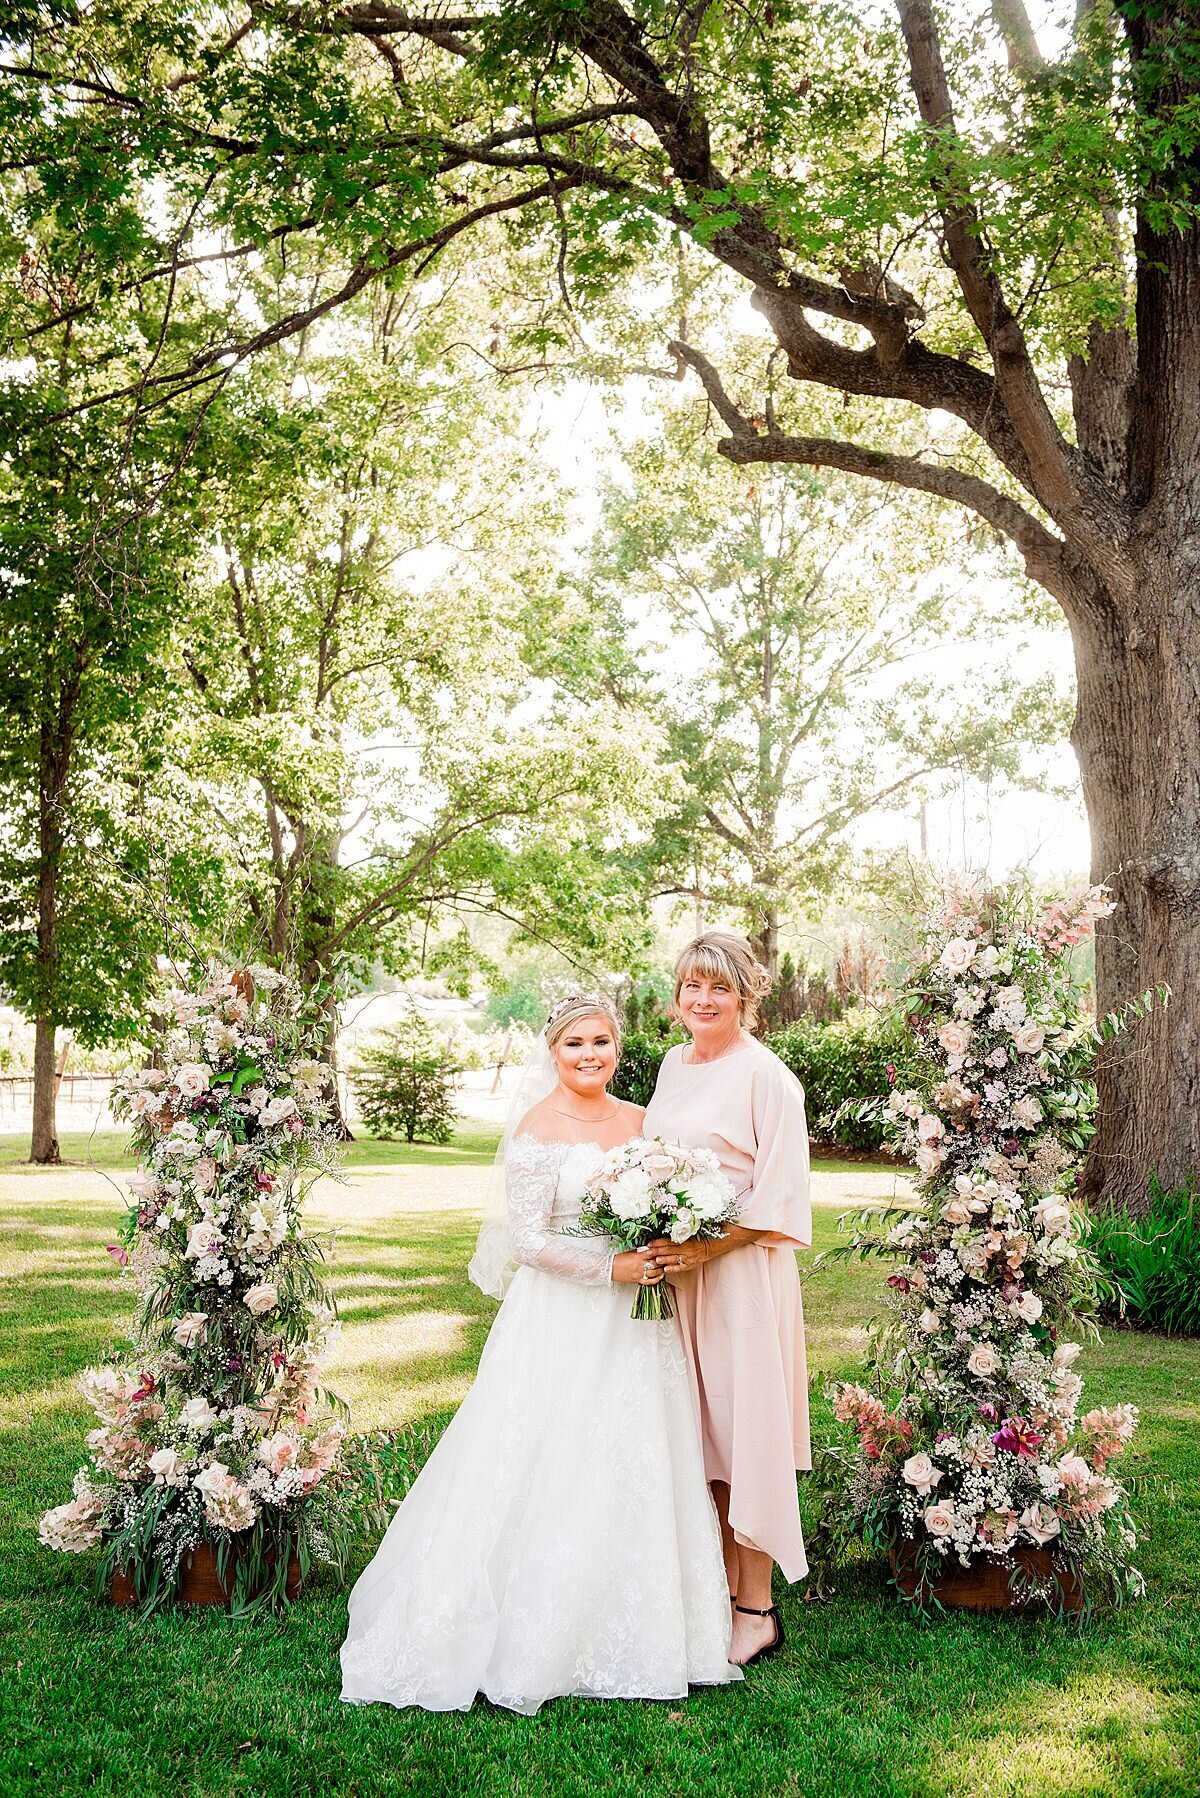 A bride wearing an off the shoulder long sleeved lace wedding dress stands next to her mother wearing a blush long sleeved dress holding a large bouquet of white peonies and blush roses. They stand in front of the lush floral arbor bursting with pampas grass, eucalyptus, blush roses, ivory roses, white hydrangea and greenery at Arrington Vineyards wedding